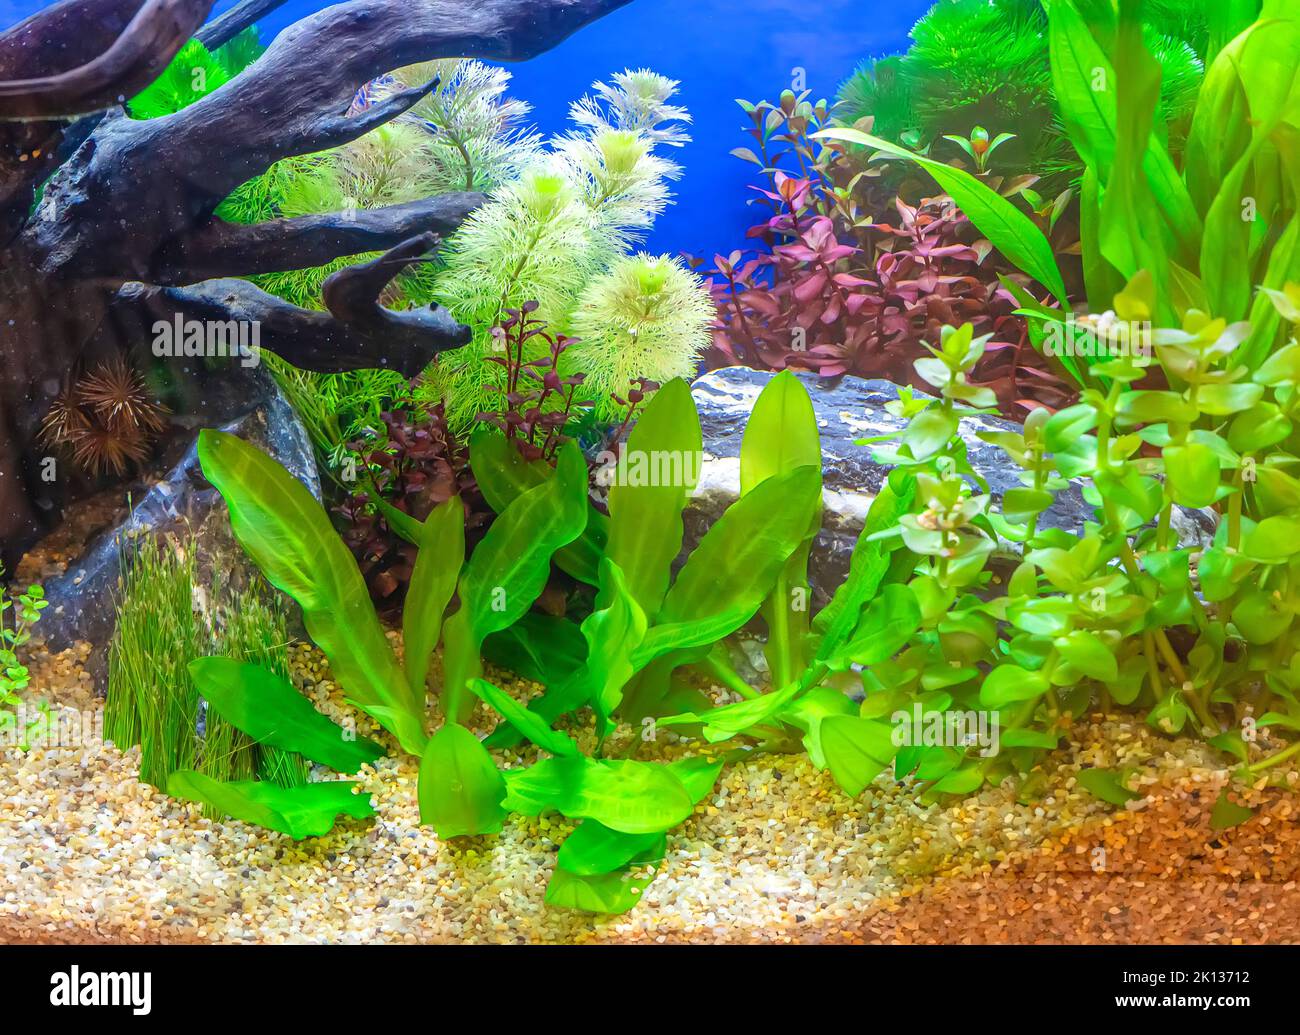 Underwater landscape nature forest style aquarium tank with a variety of  aquatic plants, stones and herb decorations Stock Photo - Alamy